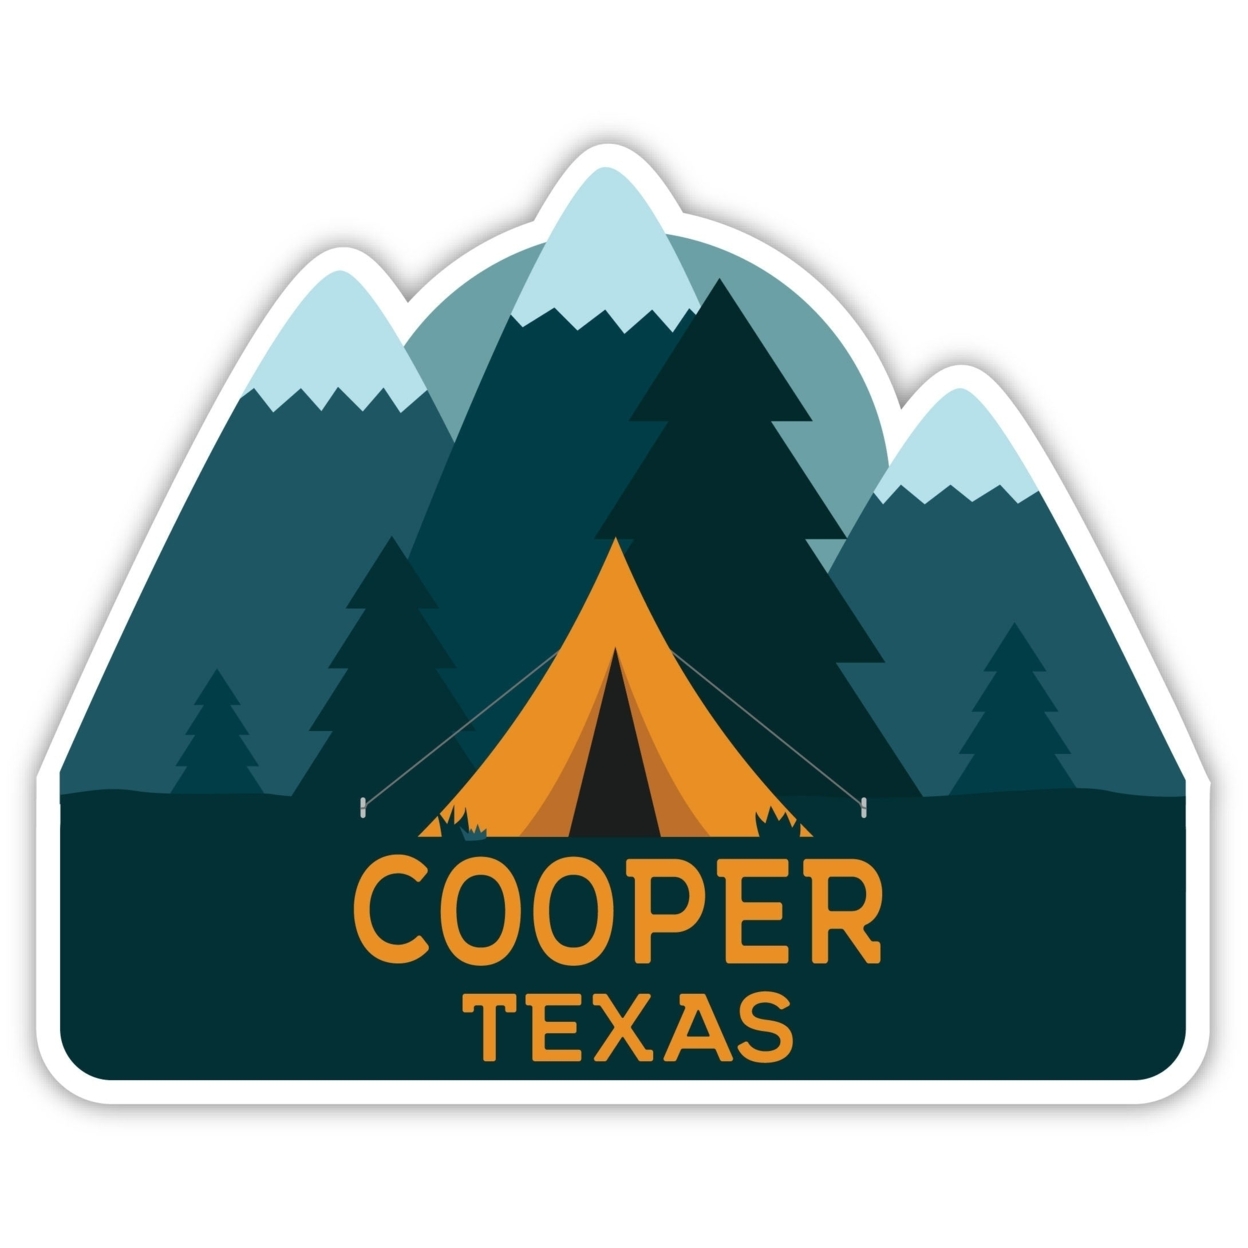 Cooper Texas Souvenir Decorative Stickers (Choose Theme And Size) - 4-Pack, 12-Inch, Tent